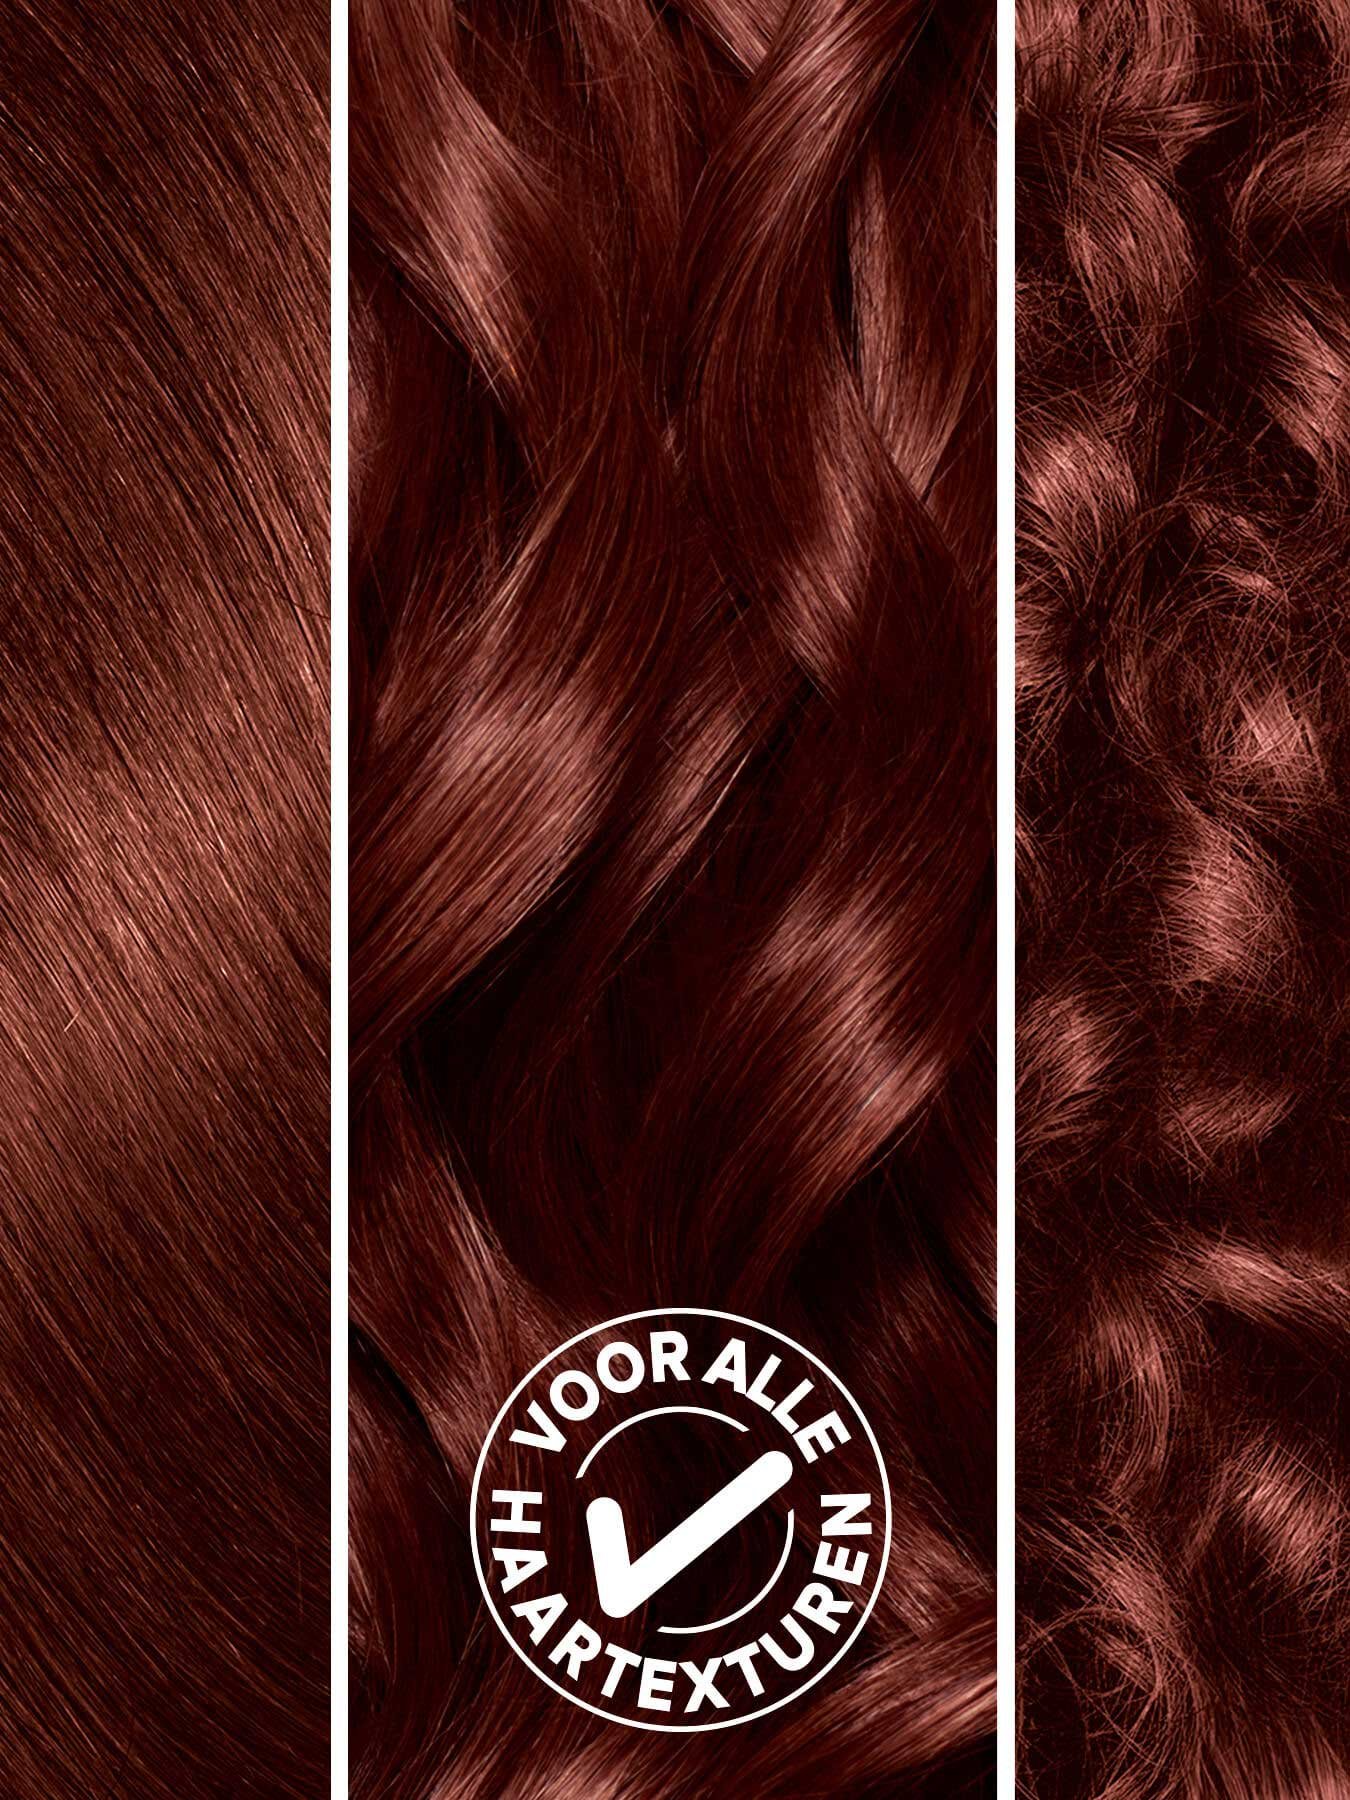 Rich Content FOR ALL HAIR TEXTURES NL 1350x1800 8